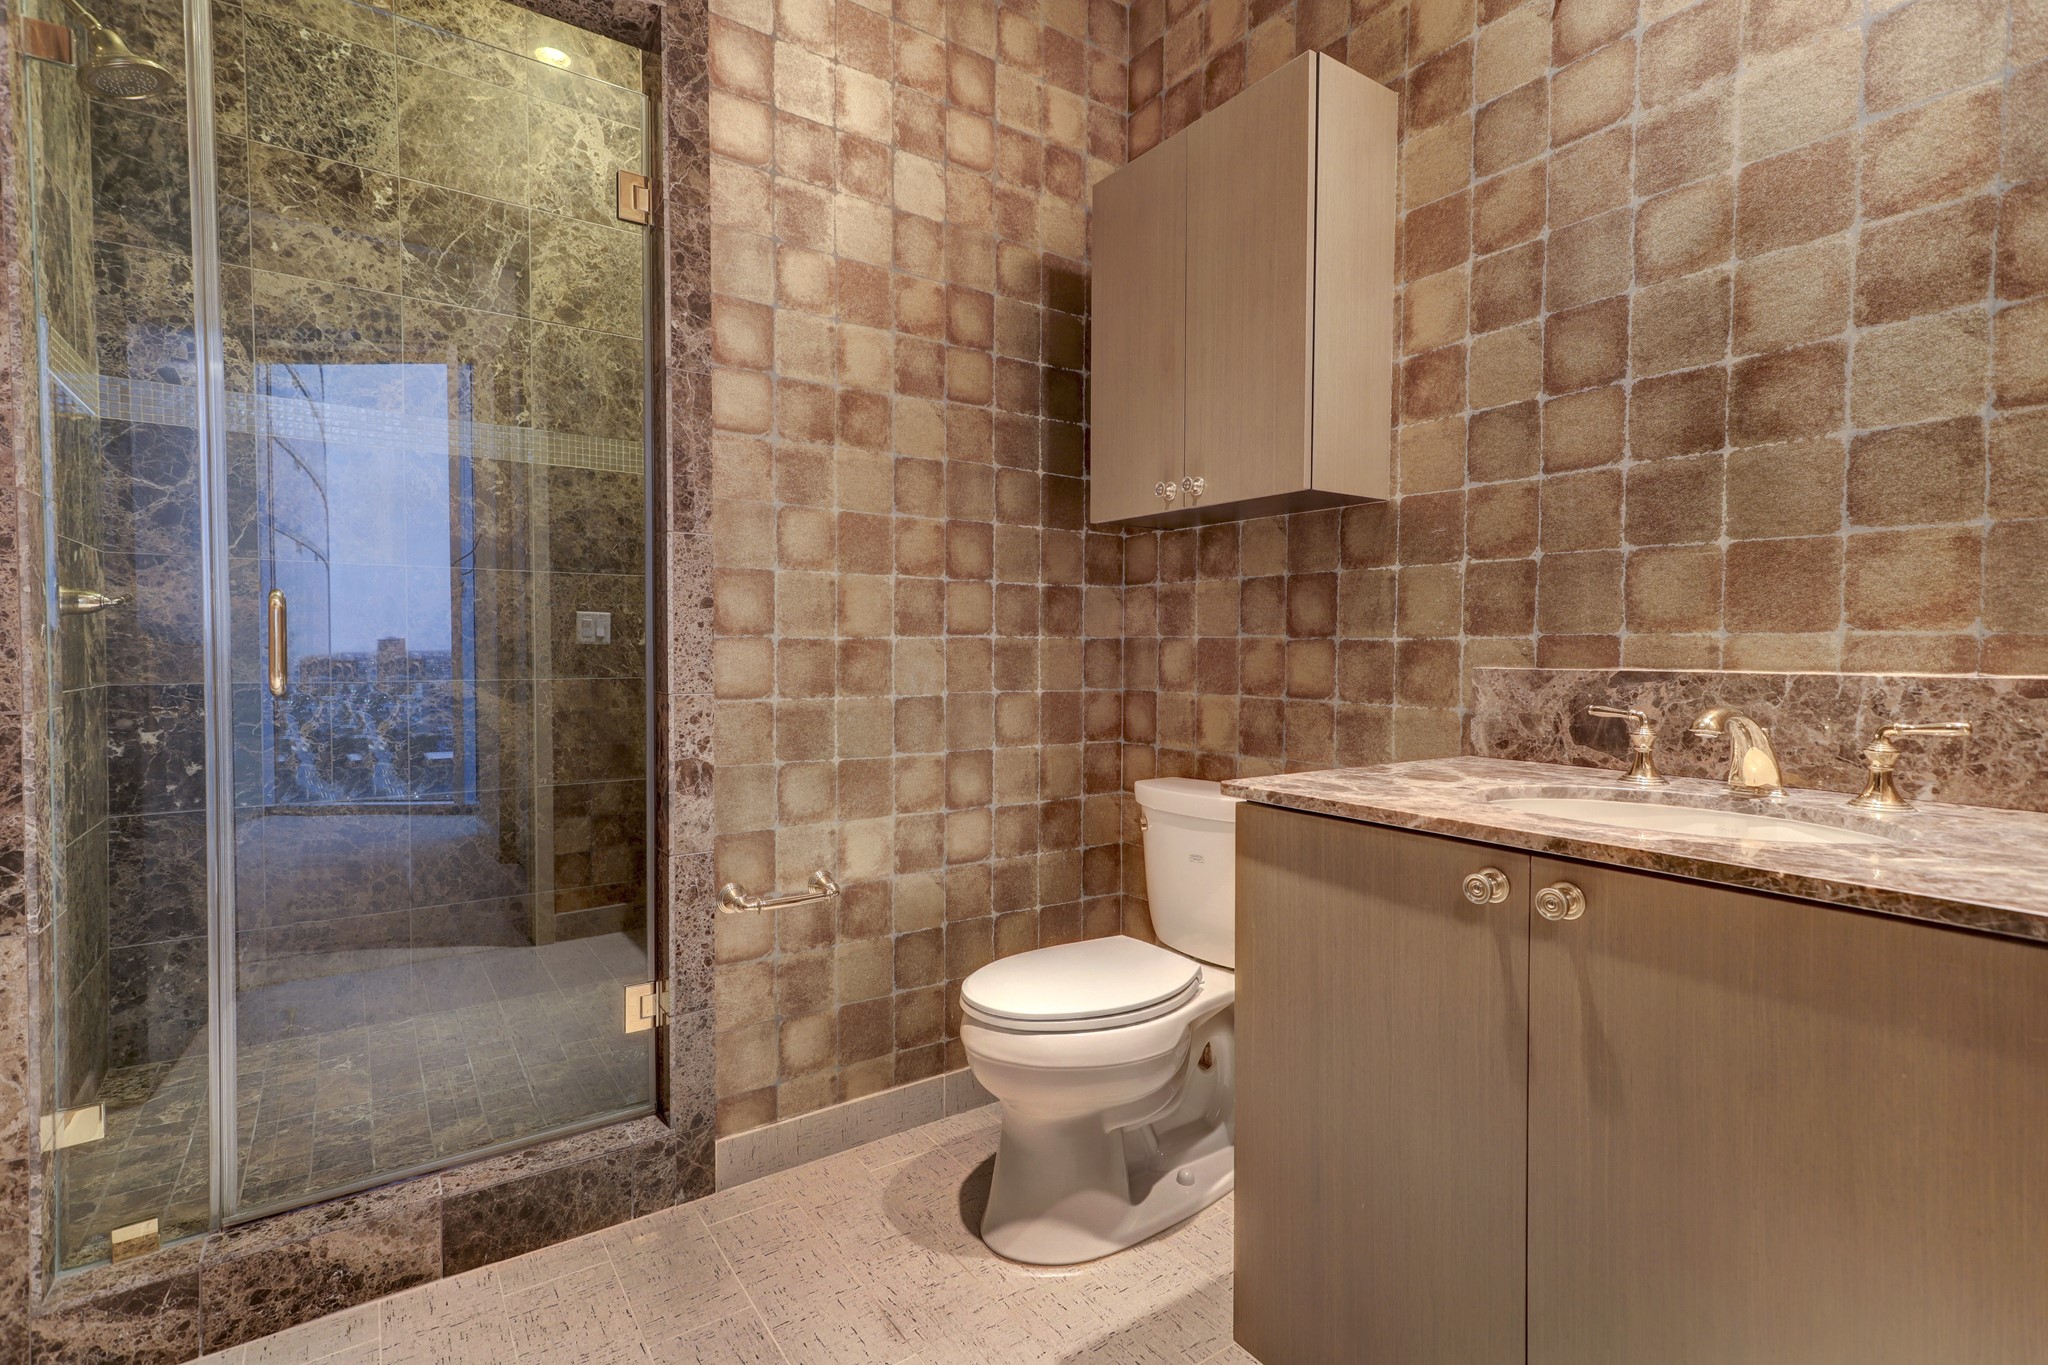 The Secondary Bedroom En-suite Bathroom features decorative wallpaper, walk-in shower with marble surround and sink vanity with a marble countertop.